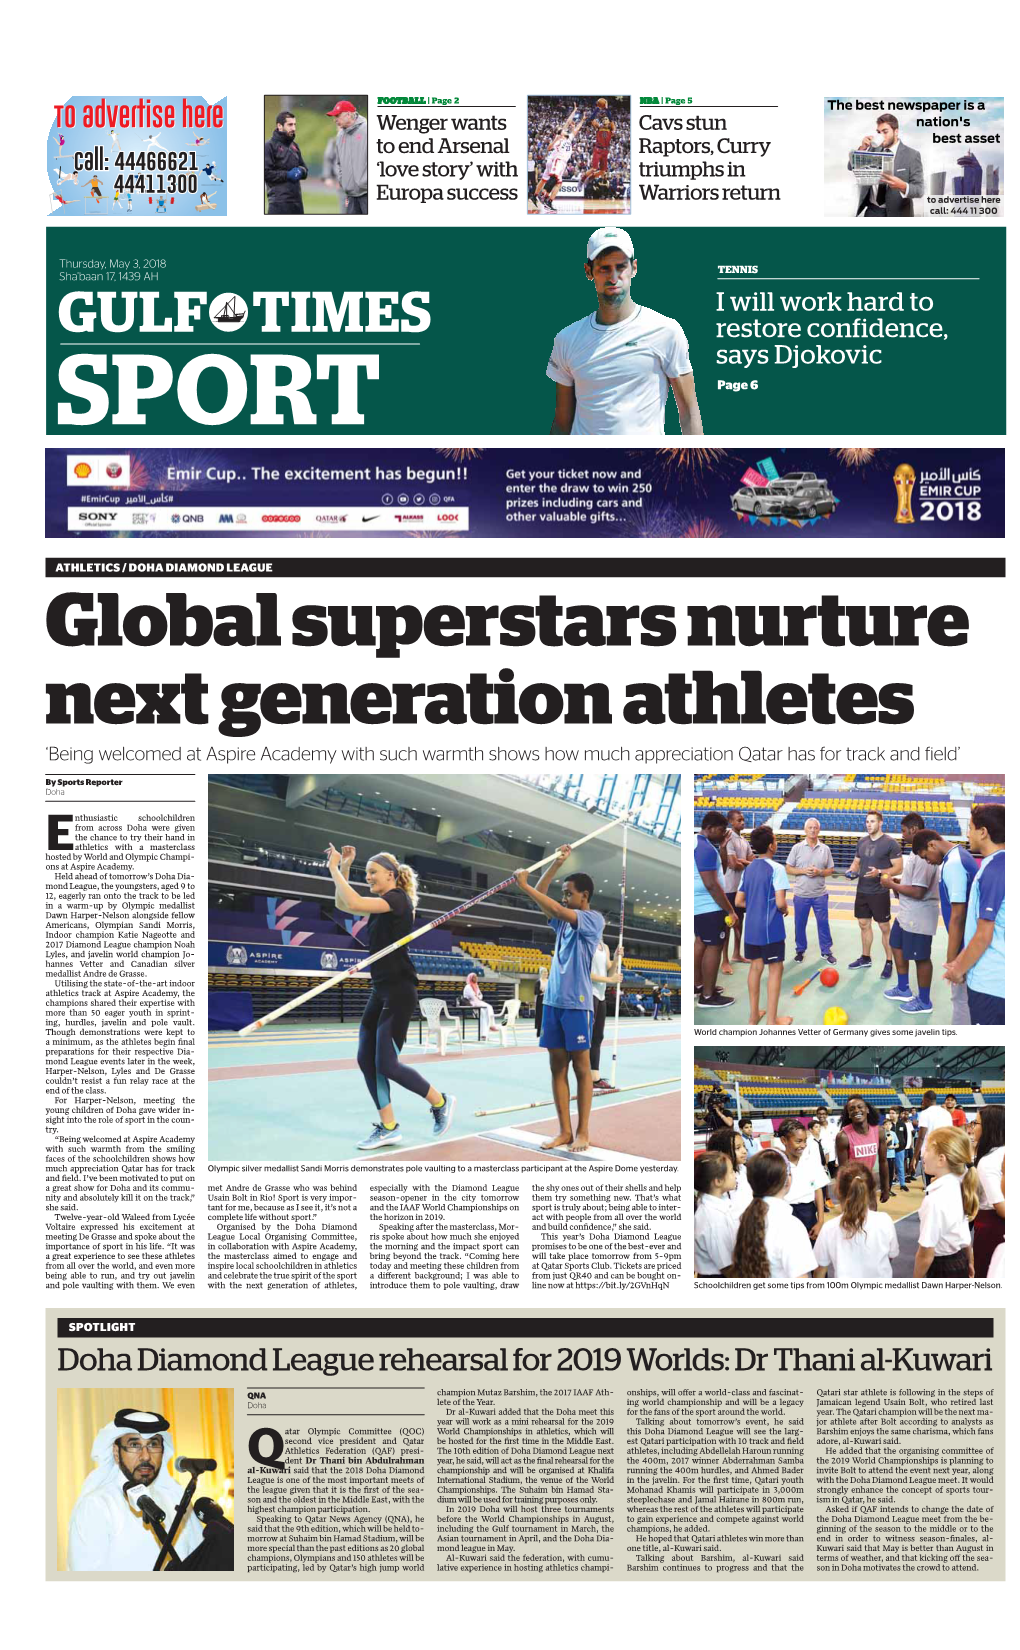 Global Superstars Nurture Next Generation Athletes ‘Being Welcomed at Aspire Academy with Such Warmth Shows How Much Appreciation Qatar Has for Track and Field’